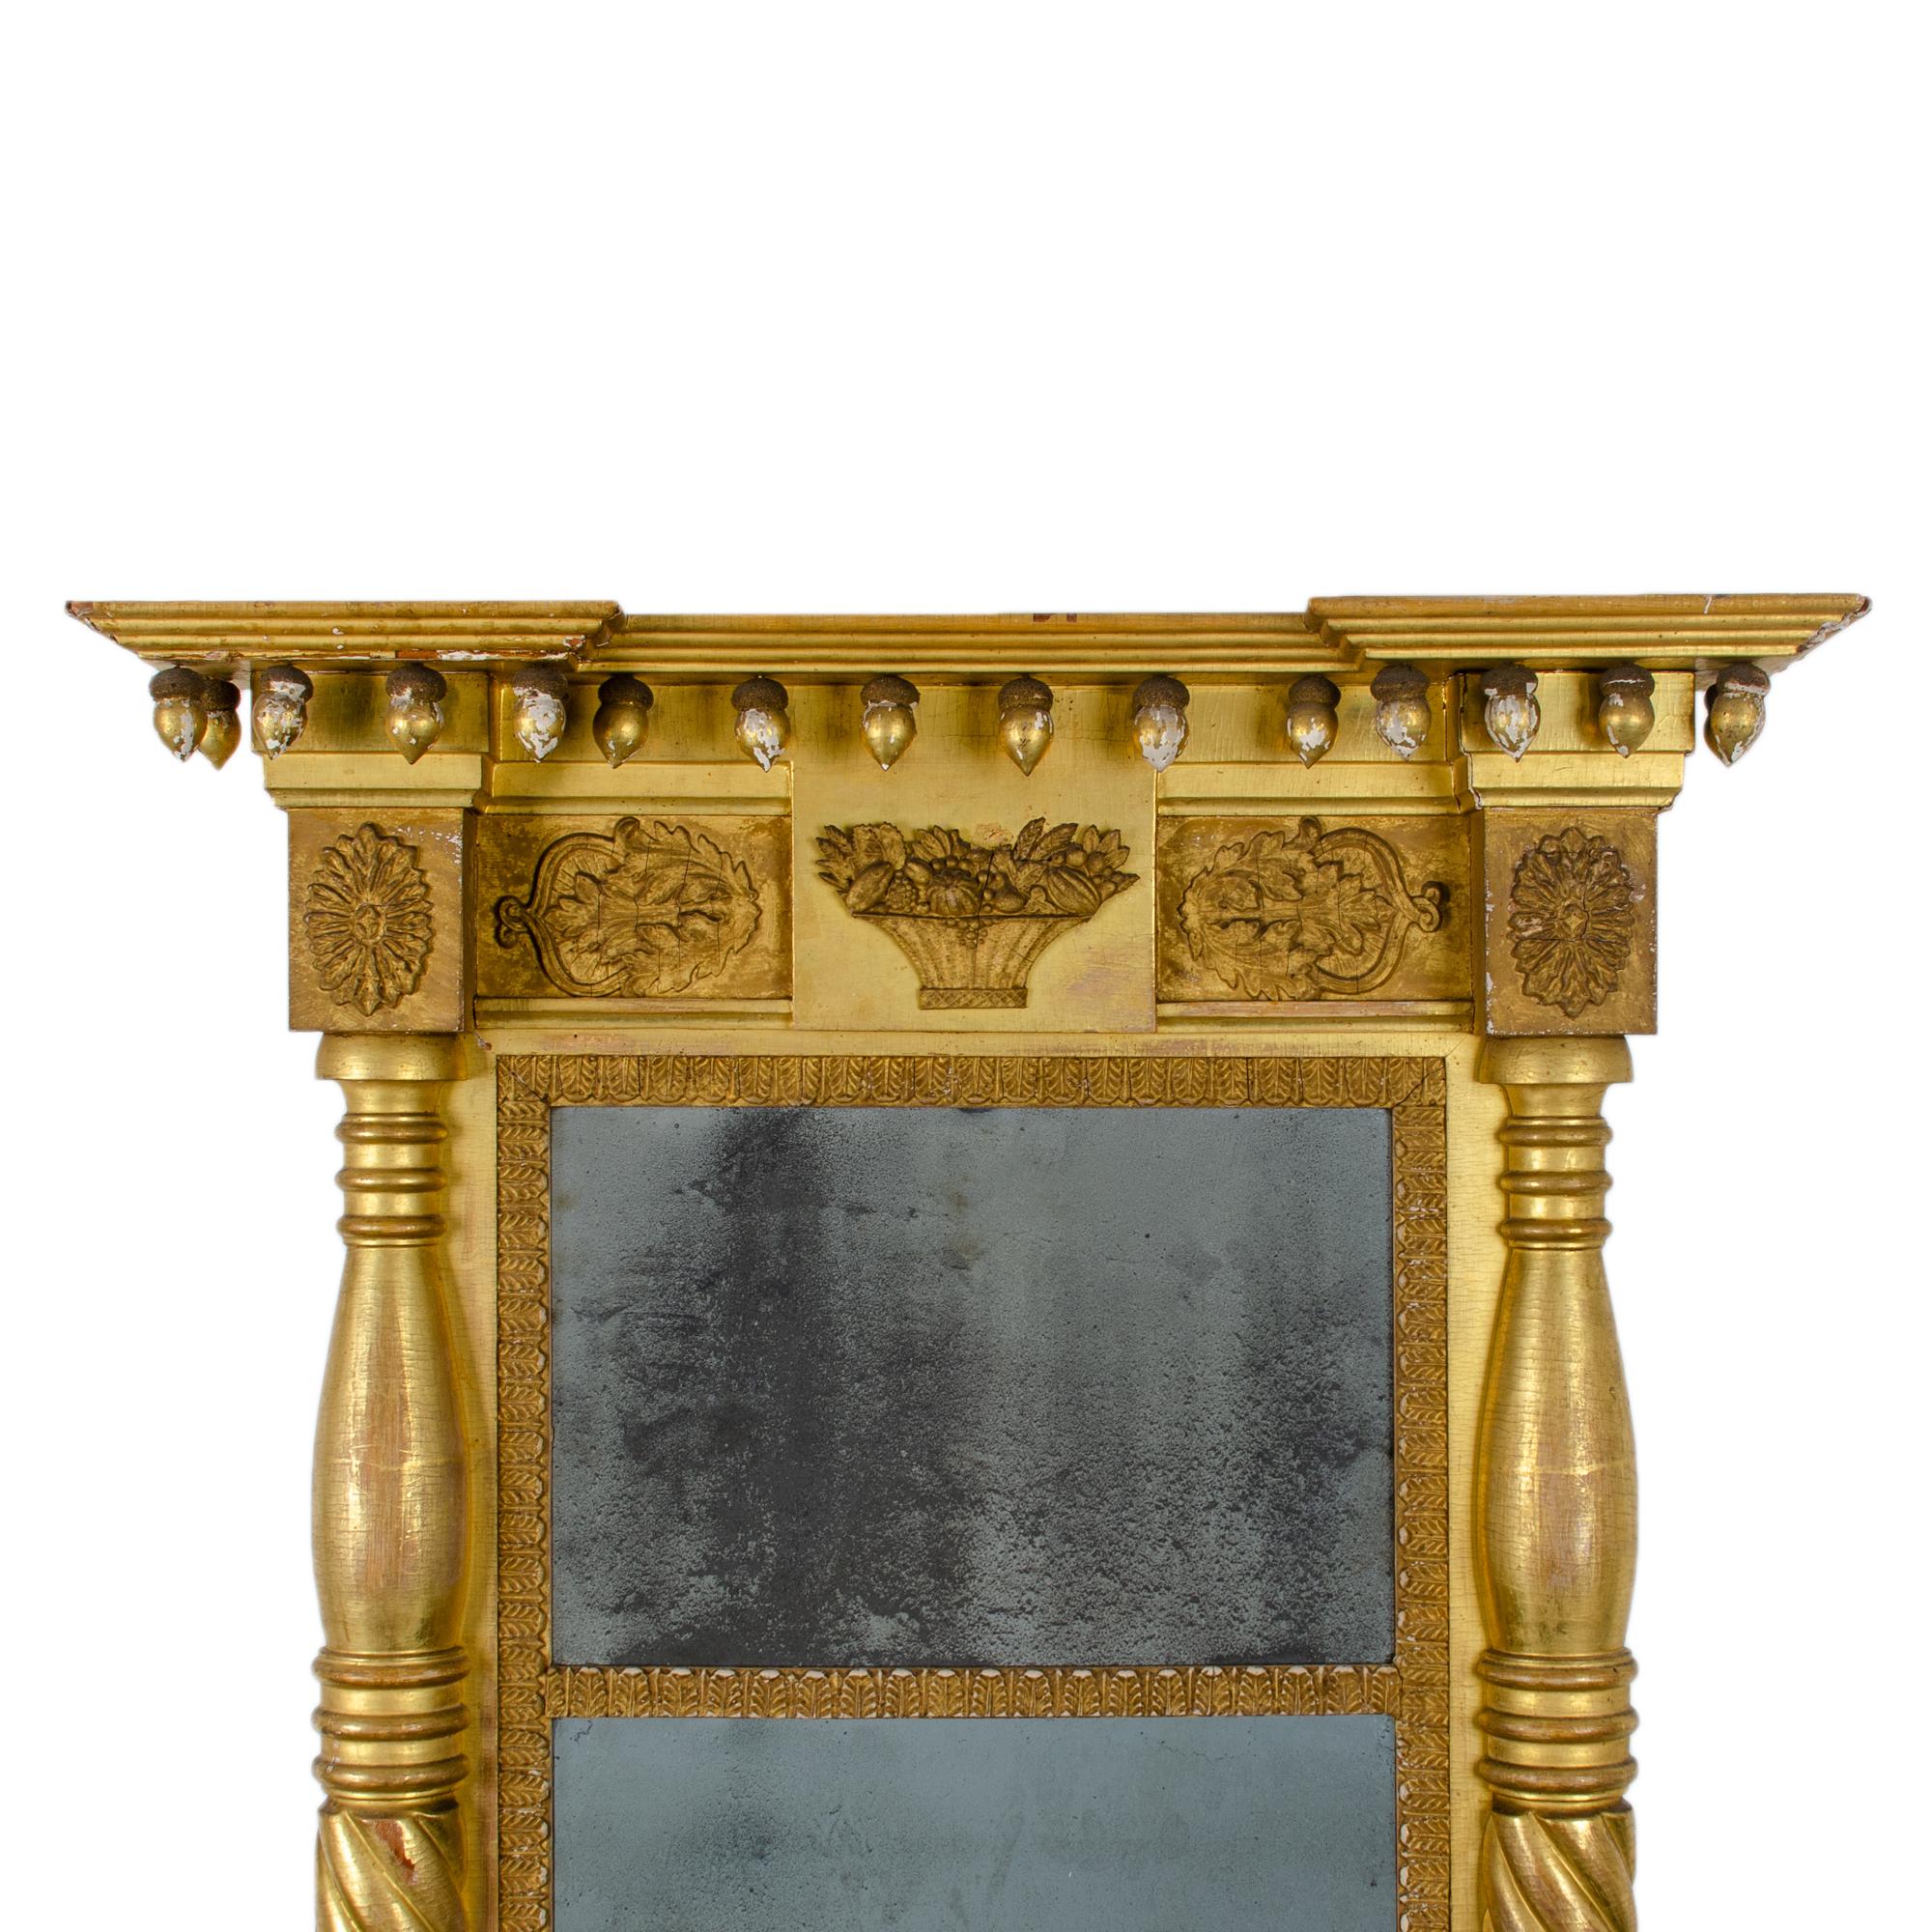 An early Empire giltwood pier mirror with rope twist split column, flower basket and leaf blocks with acorn spherules and original mercury glass, c.1815-1840.
 
29 inches wide by 5 ¼ inches deep by 48 ½ inches tall